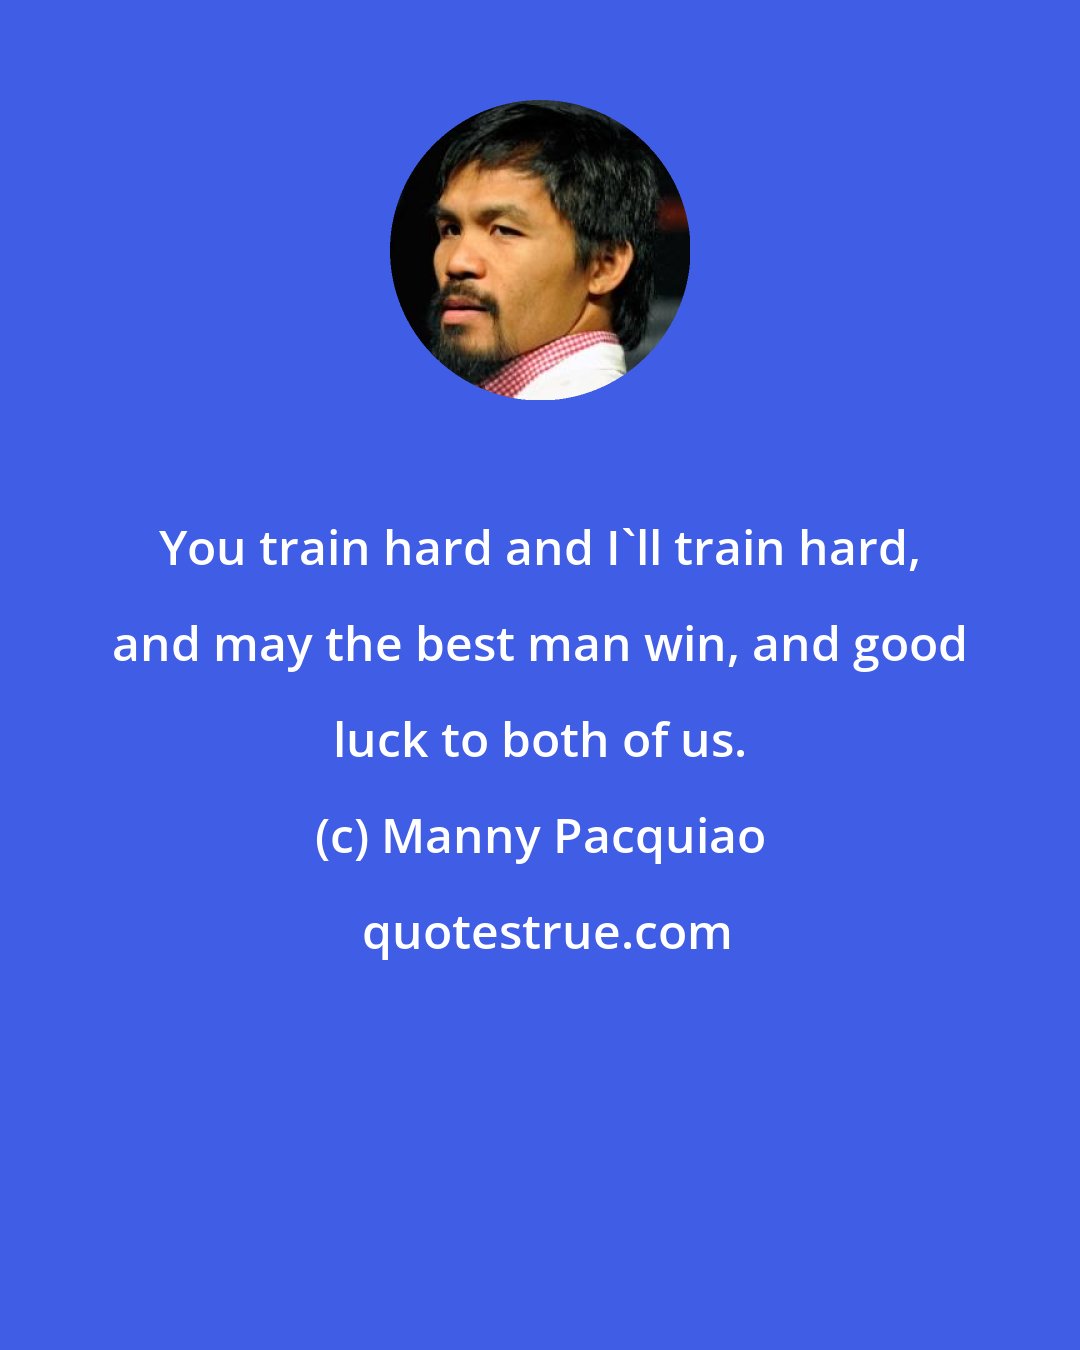 Manny Pacquiao: You train hard and I'll train hard, and may the best man win, and good luck to both of us.